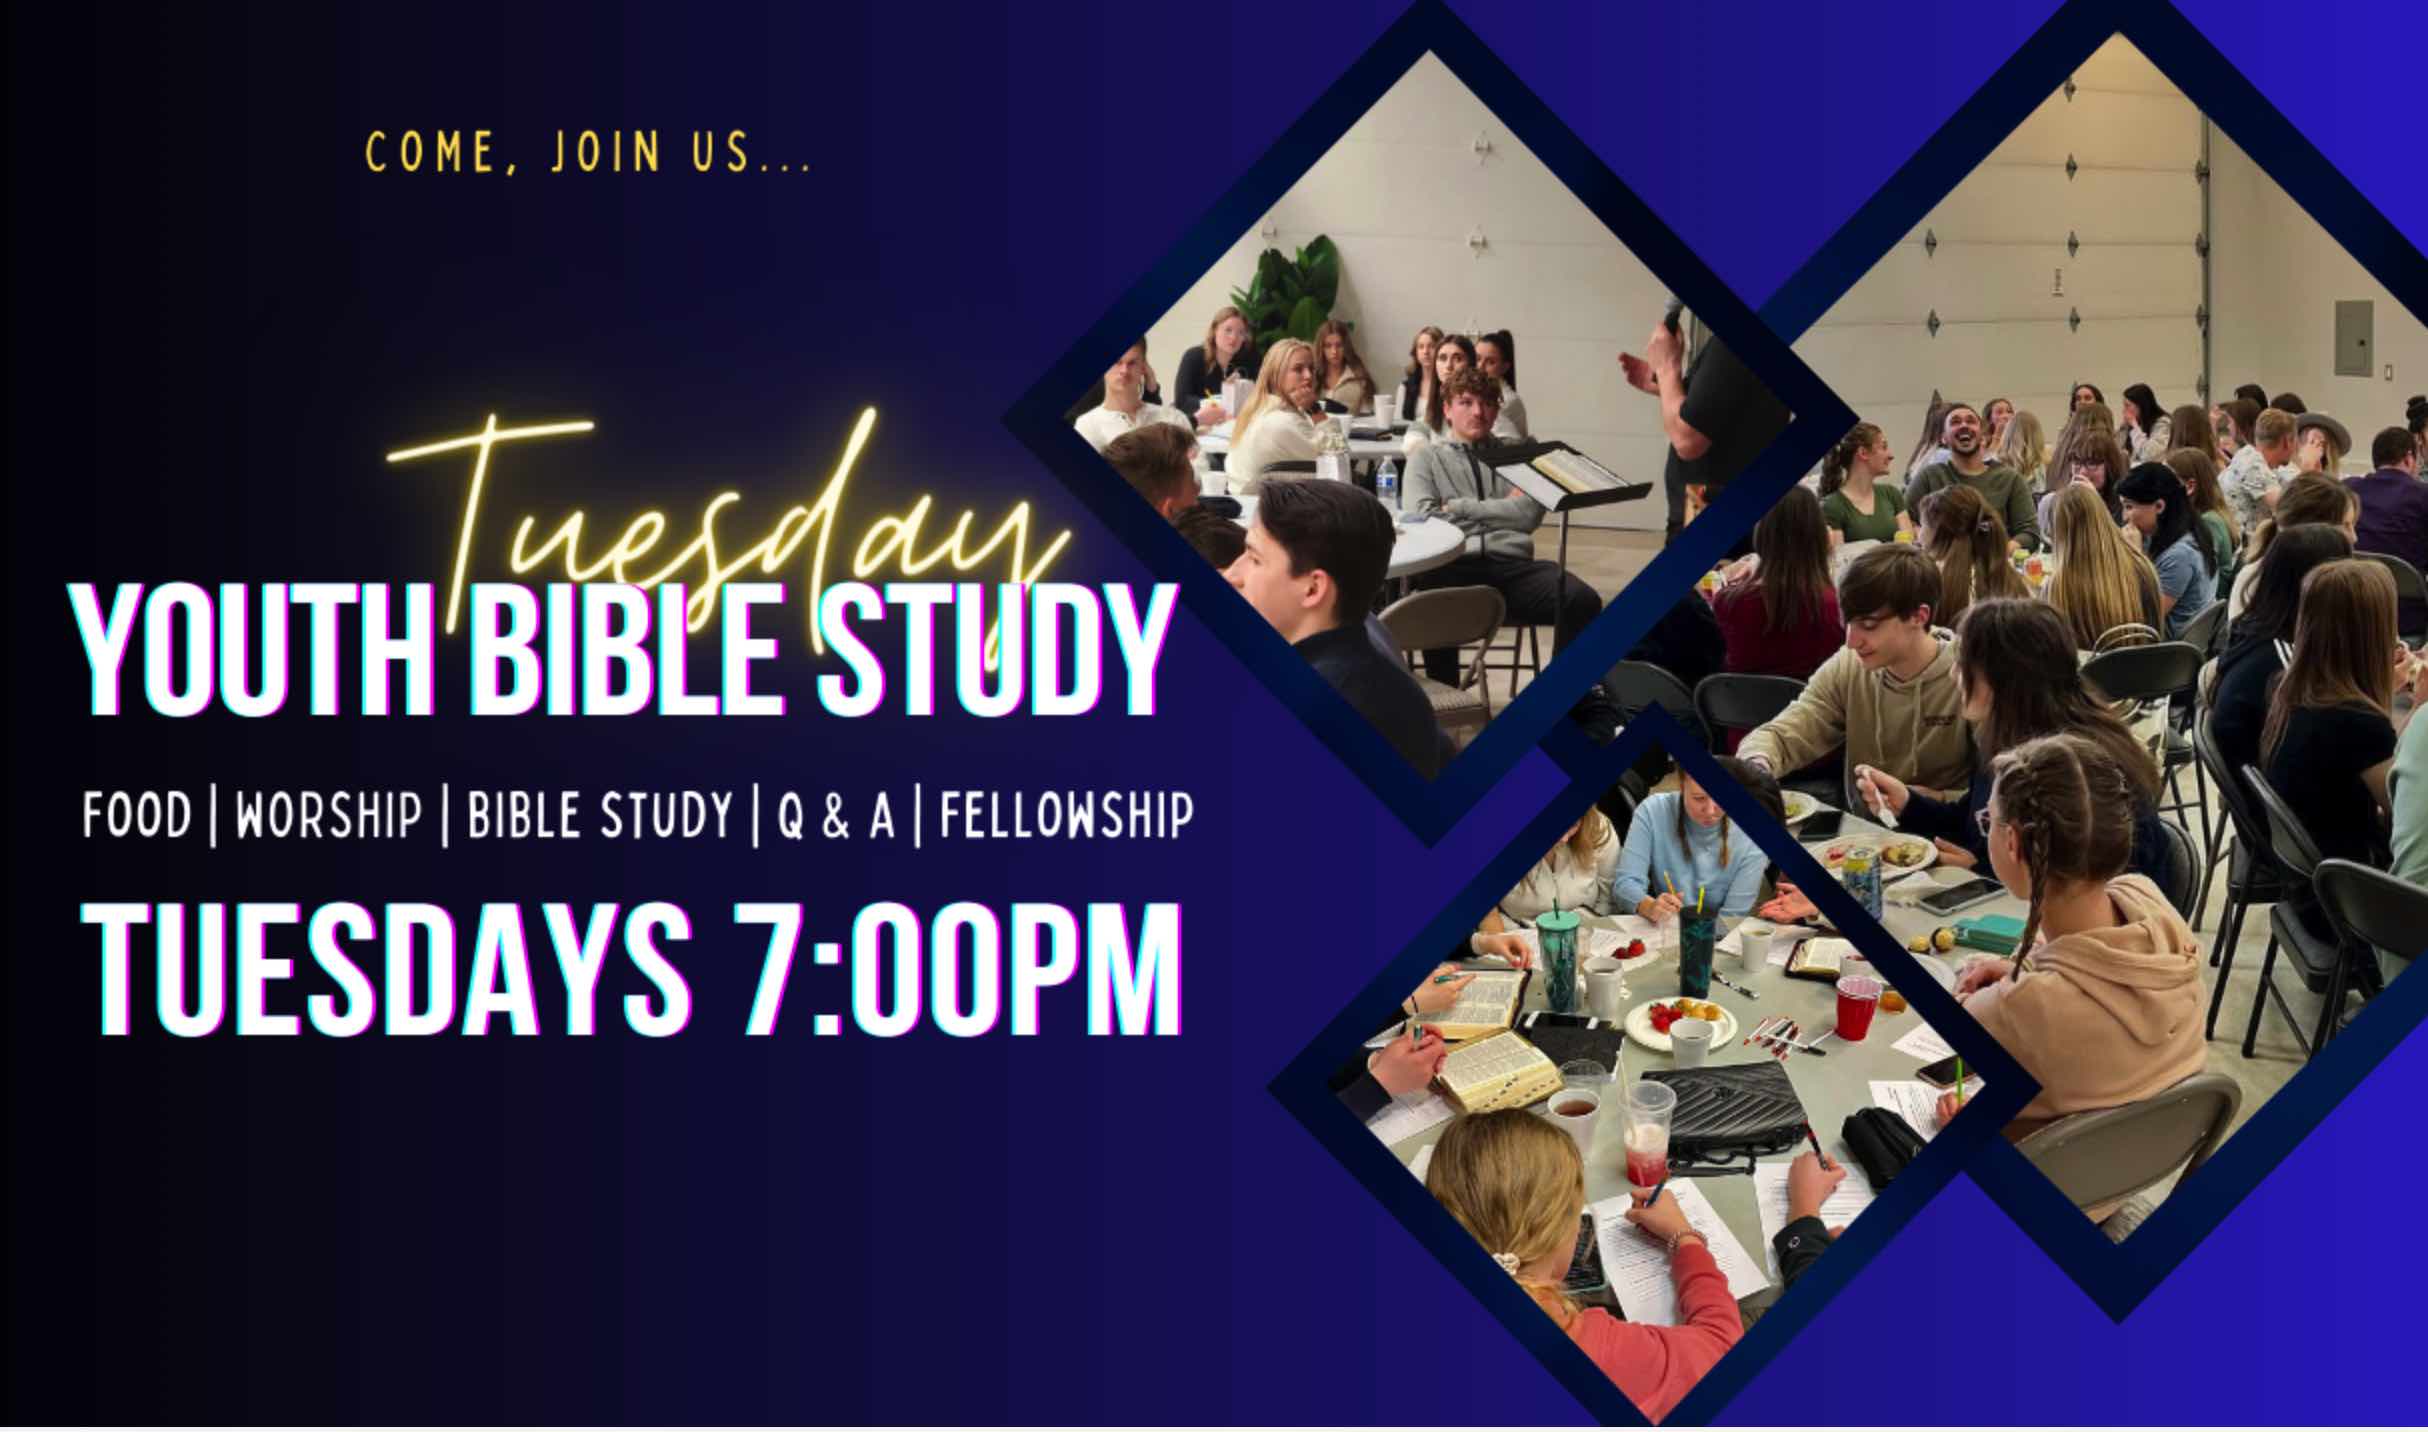 Bible study for youth